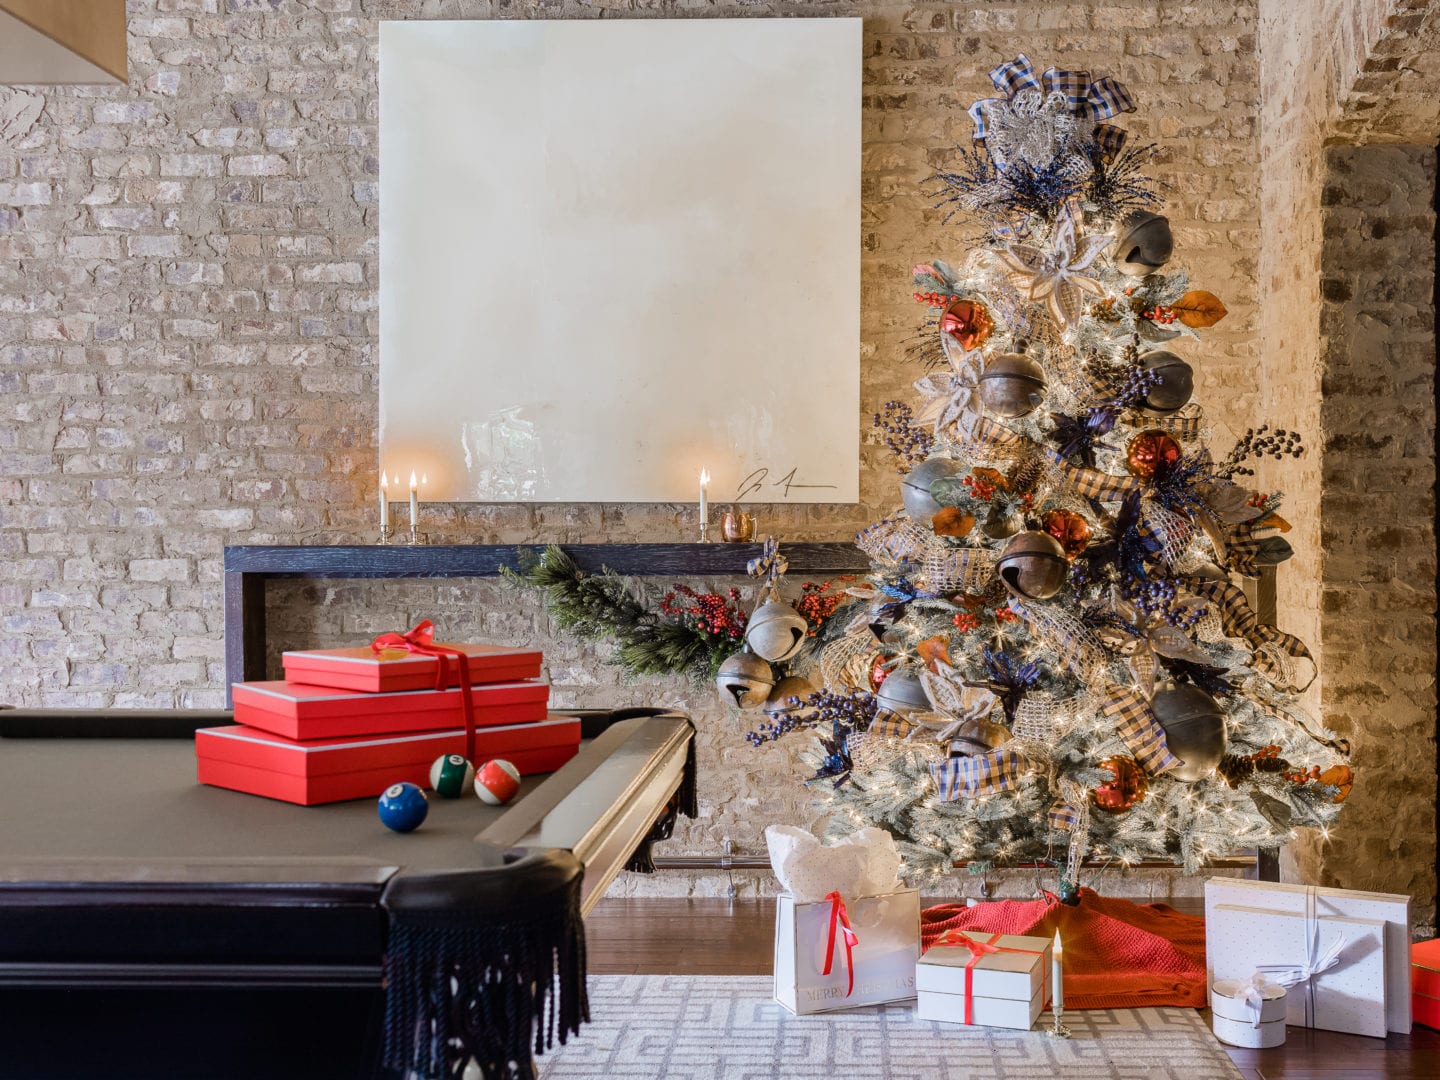 Challenge: create an over-the-top, super "extra" Christmas tree using rustic Christmas tree decorations! I wanted to invoke a ski-lodge type Christmas tree with country accents, warm navy blue Christmas tones and red accents. You be the judge if I succeeded!